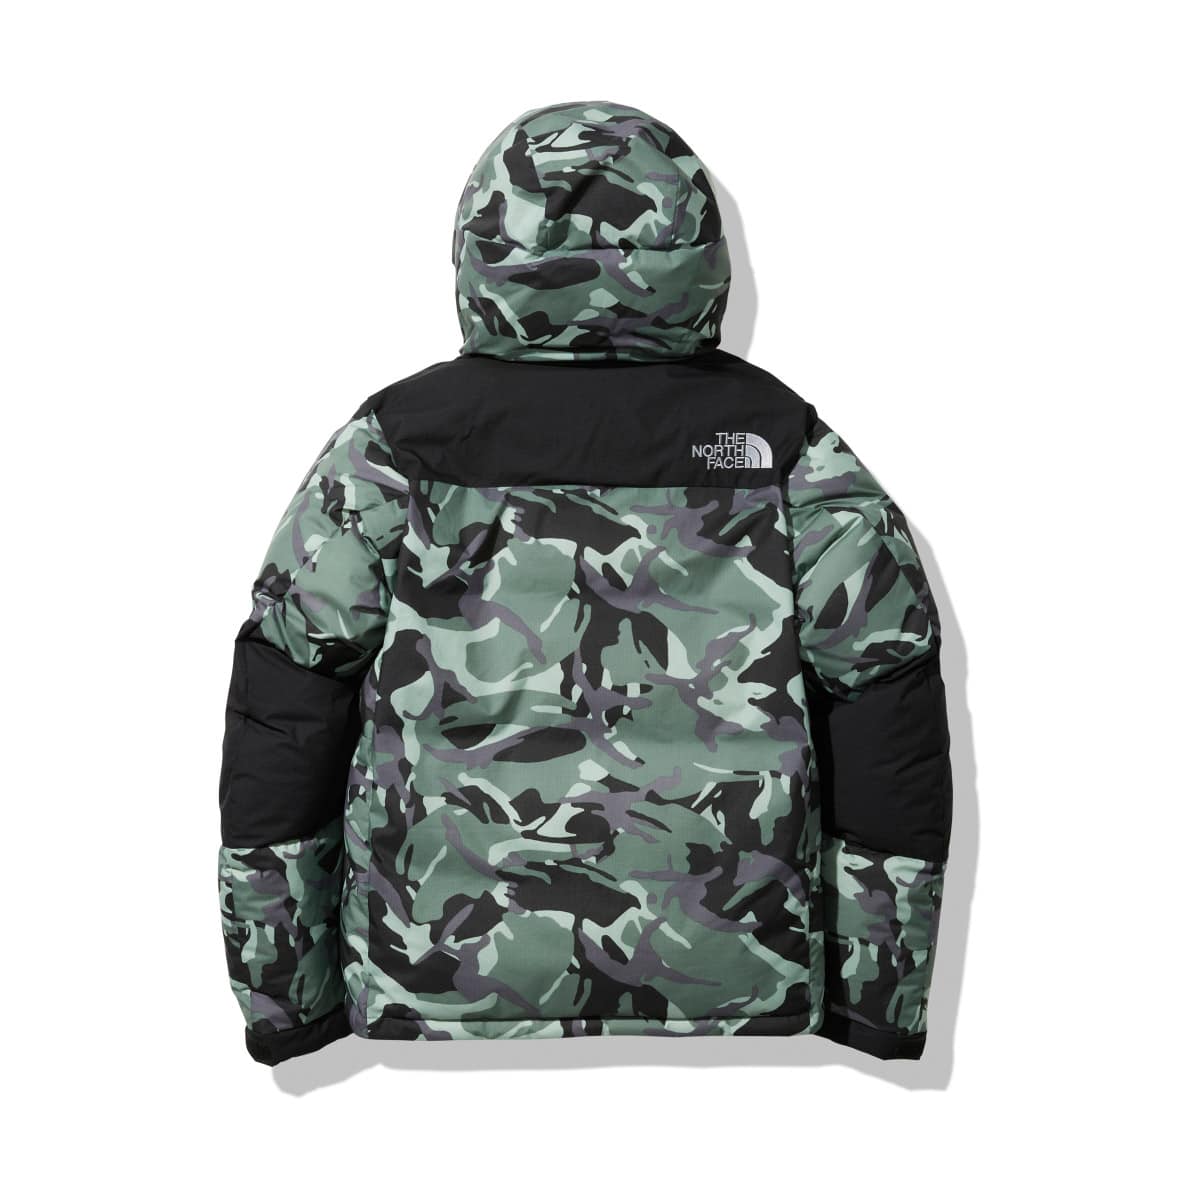 THE NORTH FACE NOVELTY BALTRO LIGHT JACKET ローレルリースグリーン 